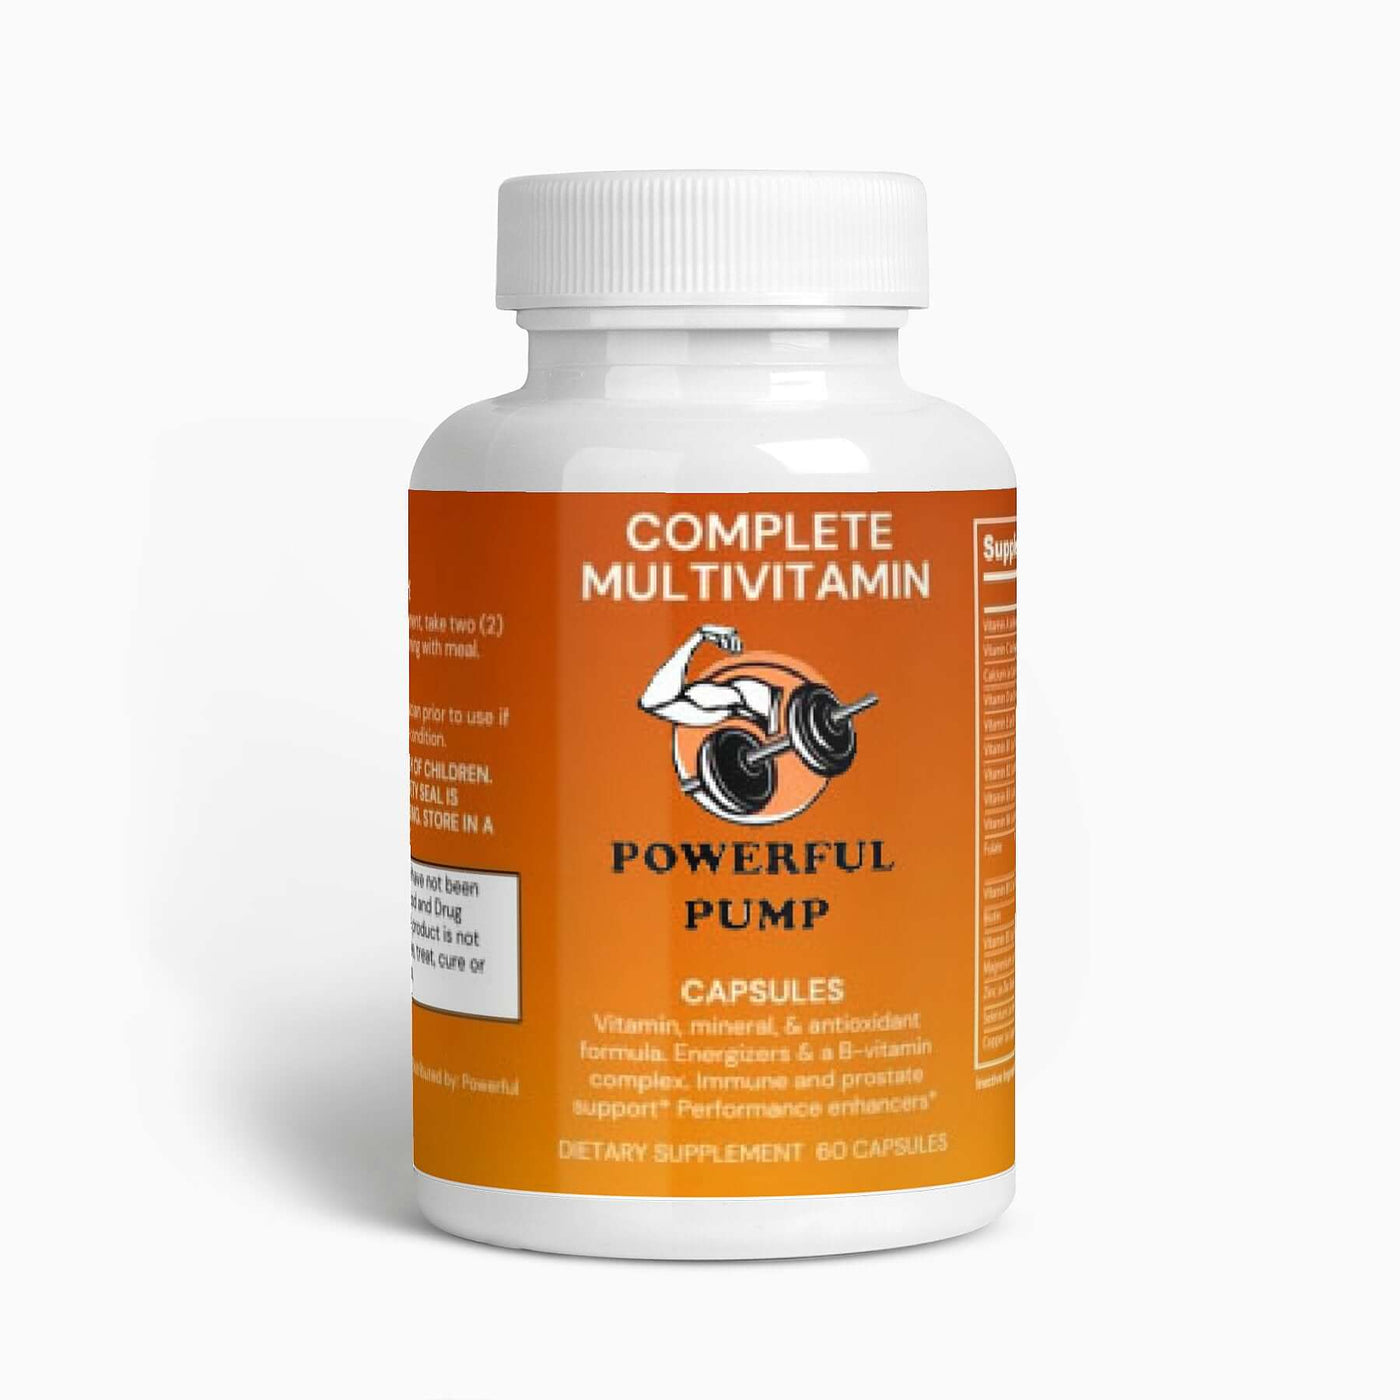 Complete Multivitamin: A bottle of comprehensive multivitamin supplement, essential for overall health and well-being.